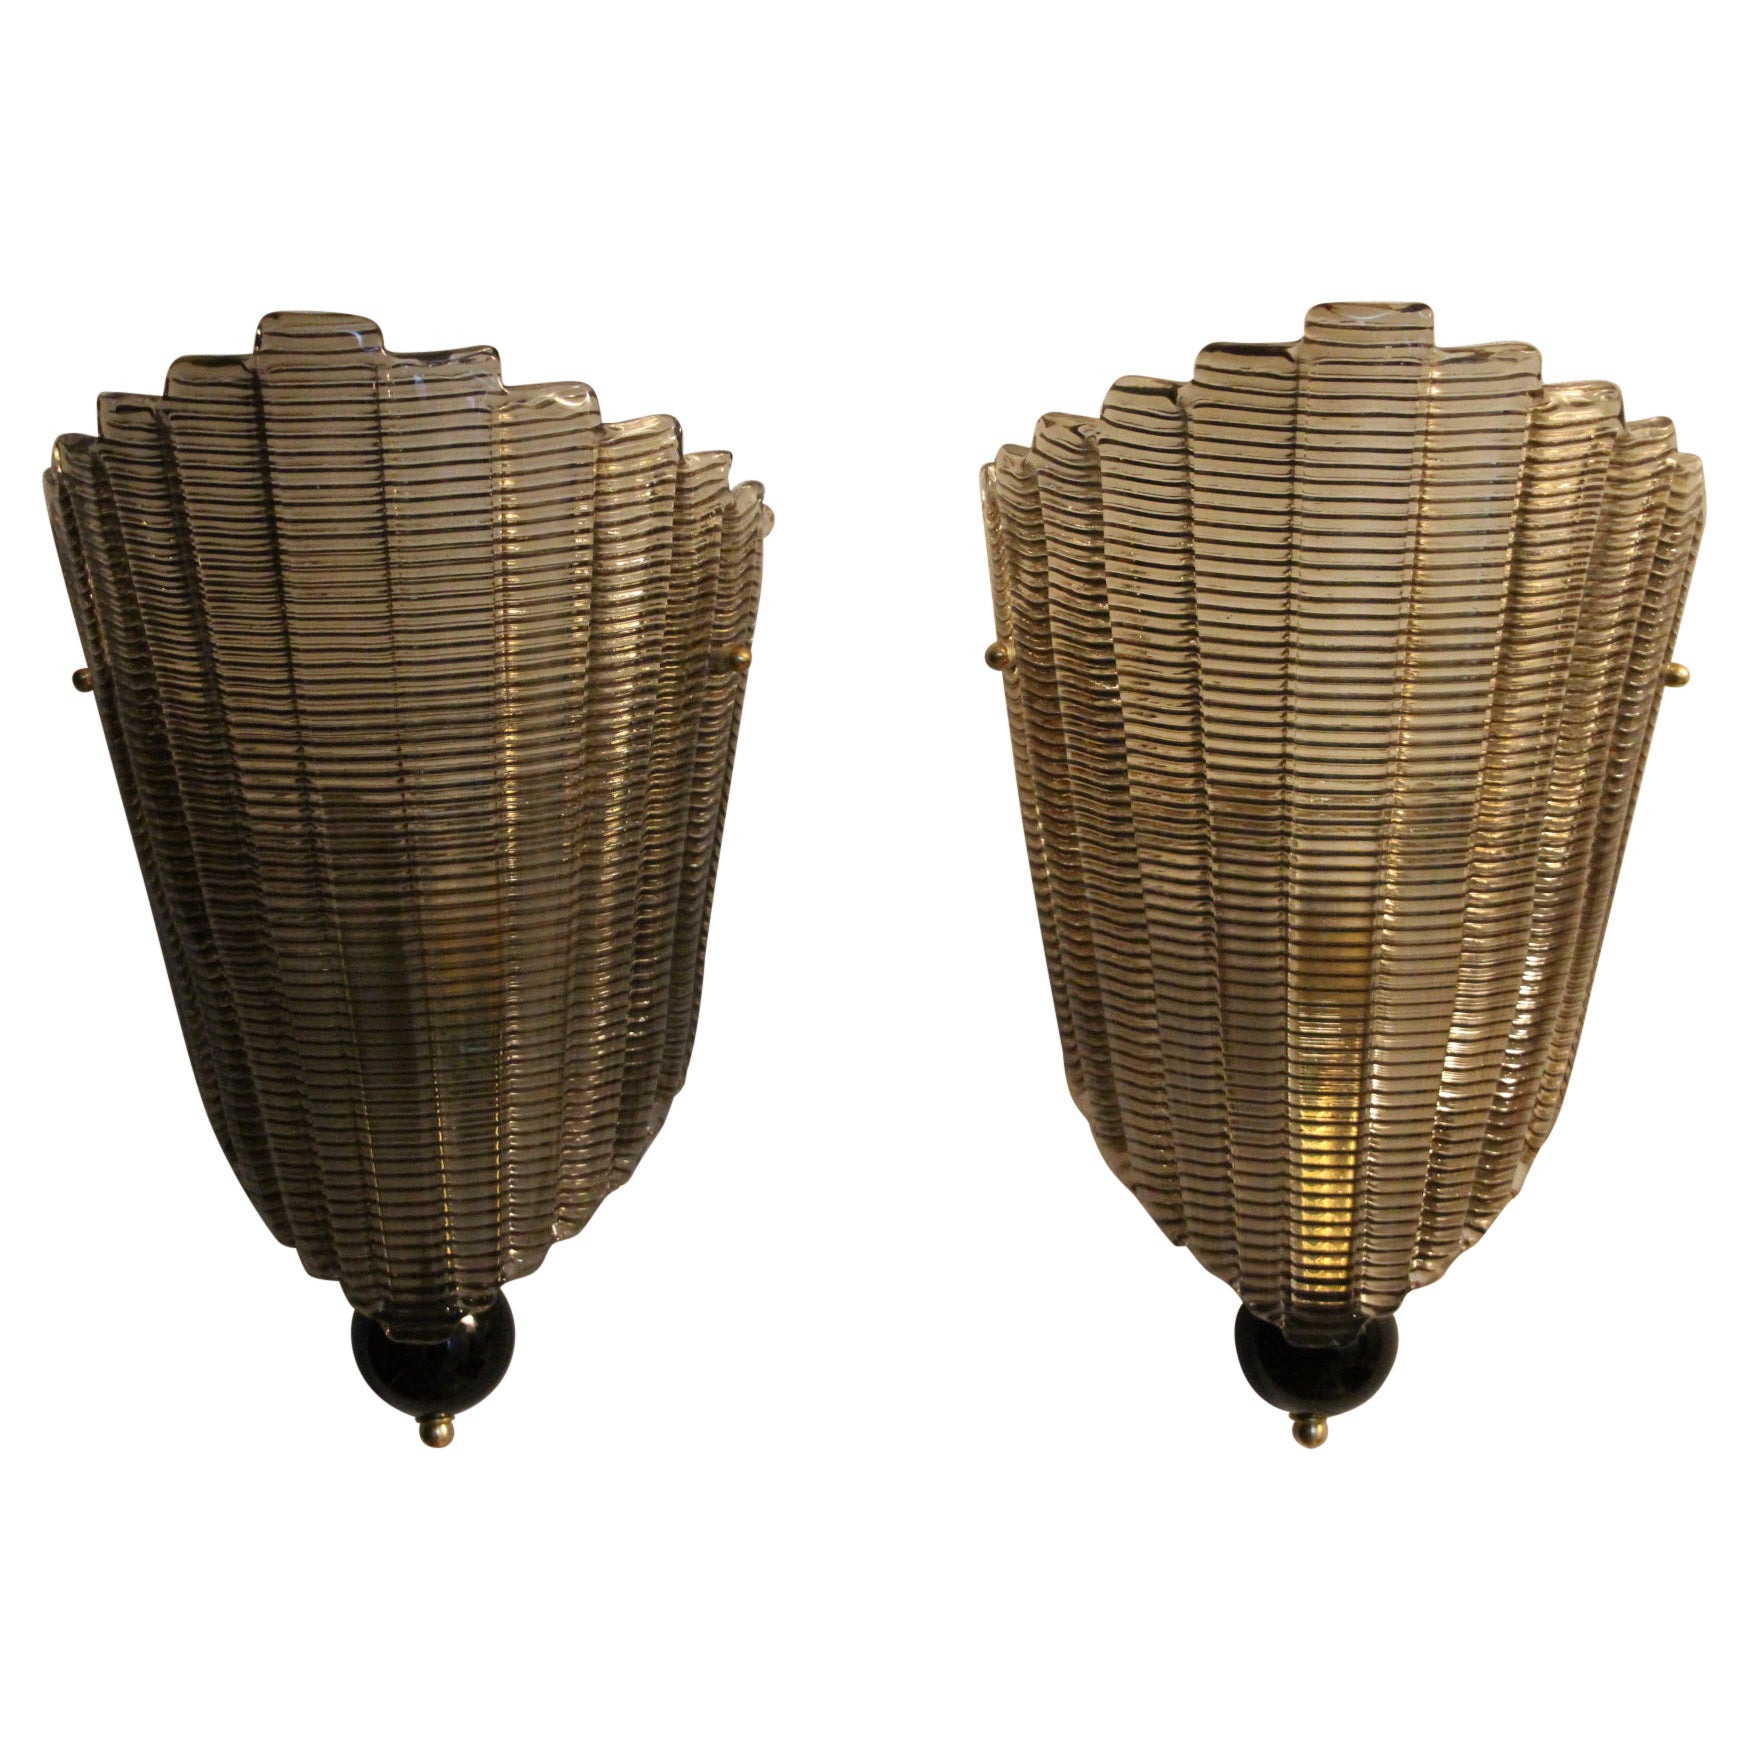 Pair of Textured Smoked Murano Glass Sconces For Sale